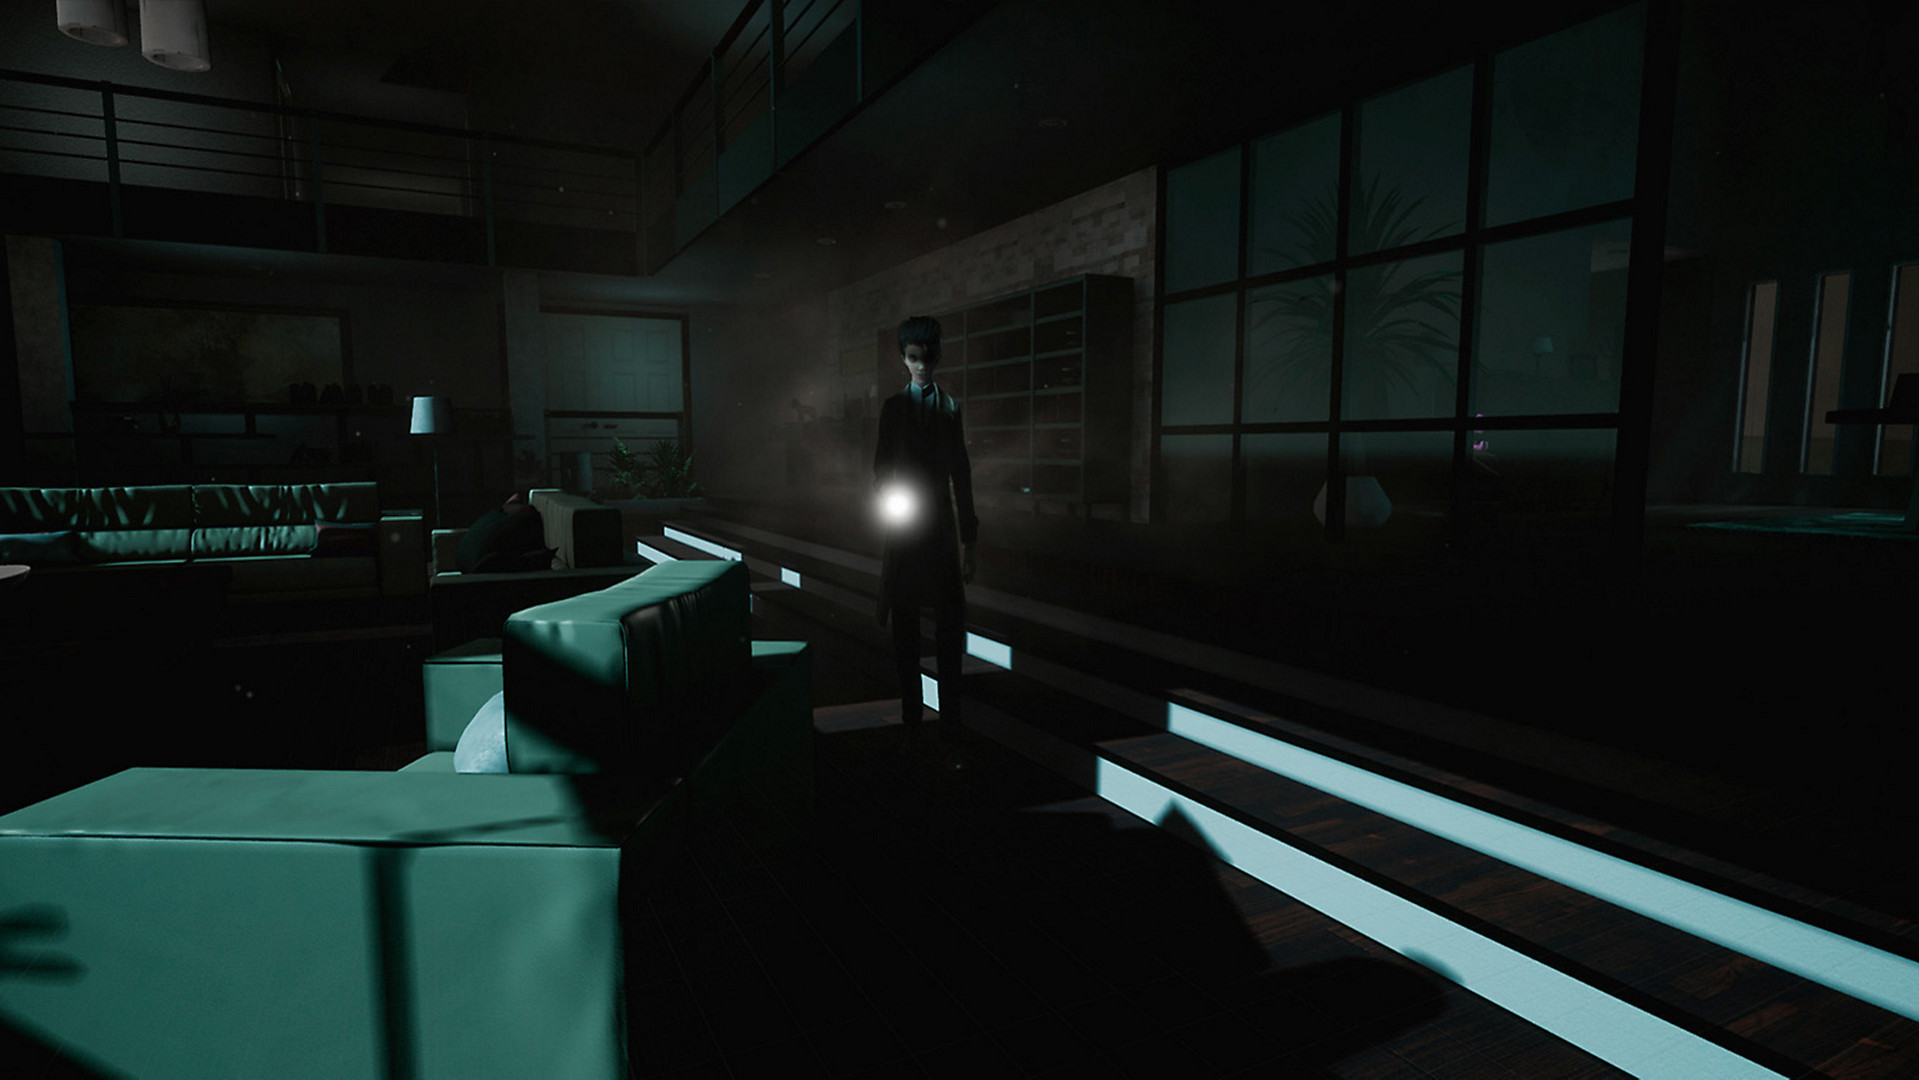 Intruders: Hide and Seek – Trying To Deliver A Unique Stealth-Horror VR Experience